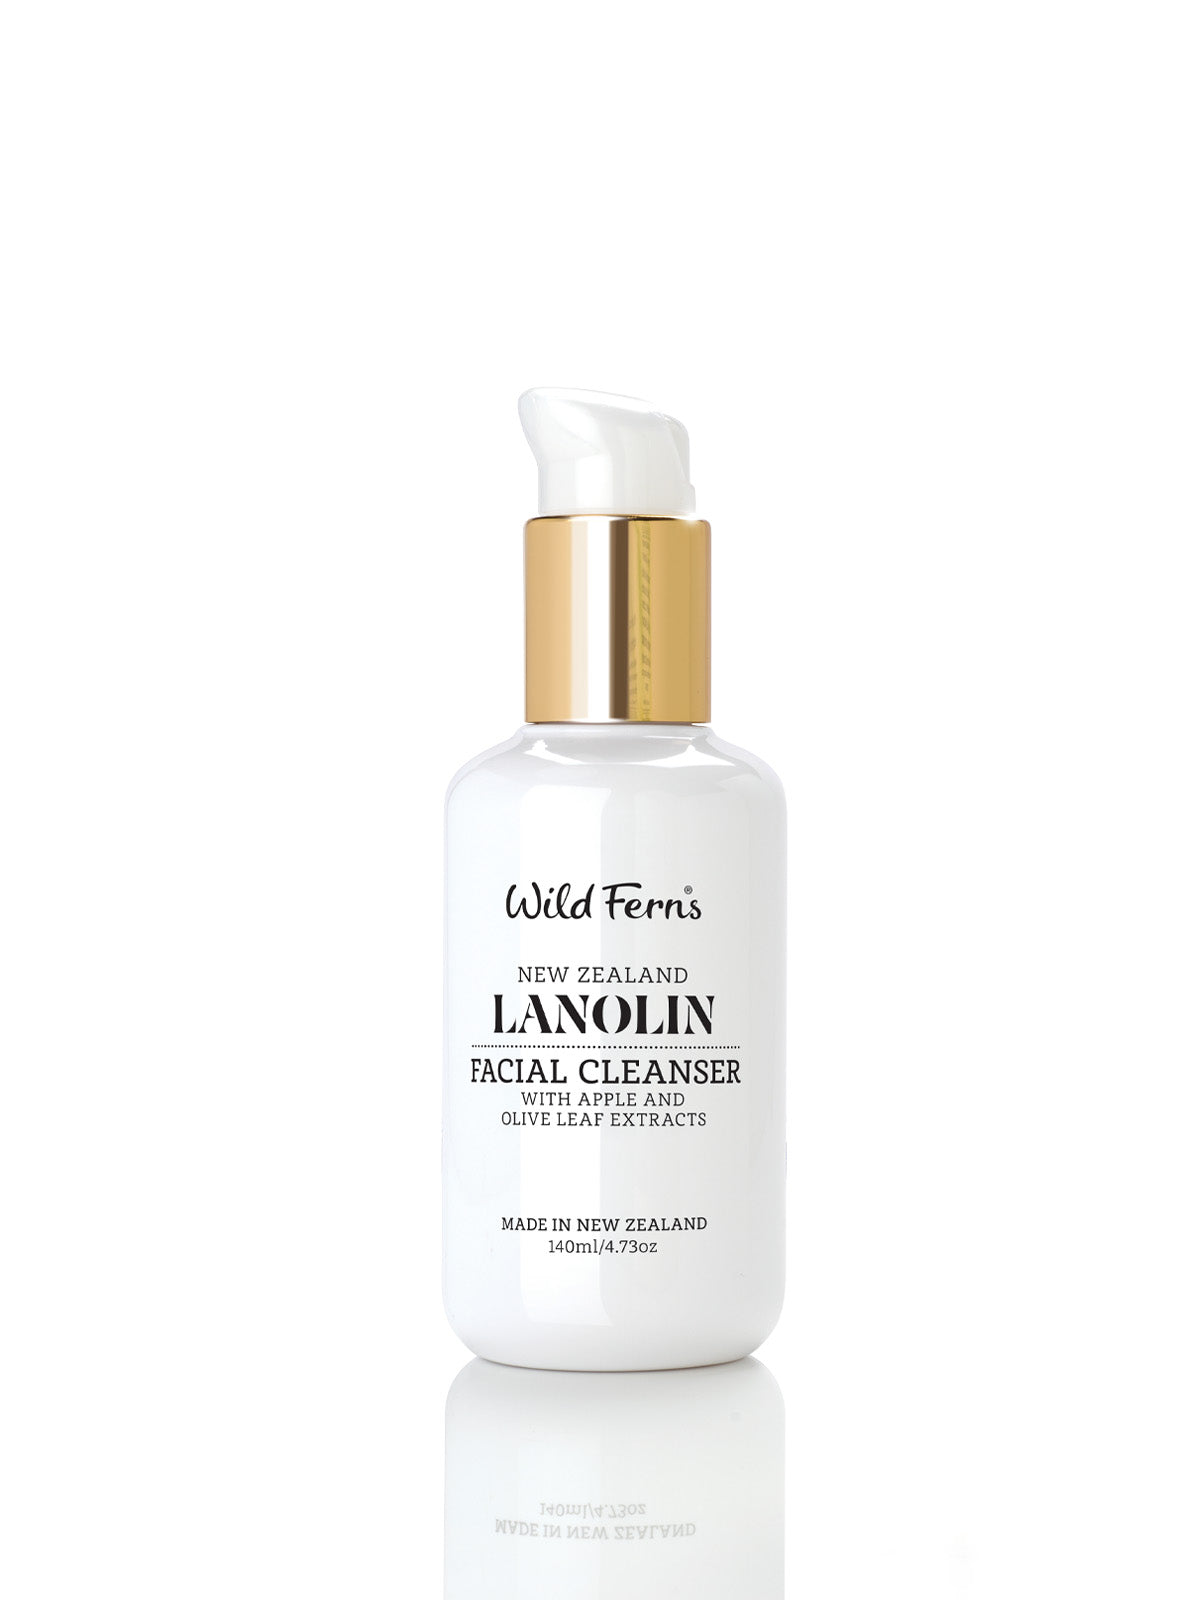 Wild Ferns Lanolin Facial Cleanser with Apple and Olive Leaf Extracts, 140ml - Main Image